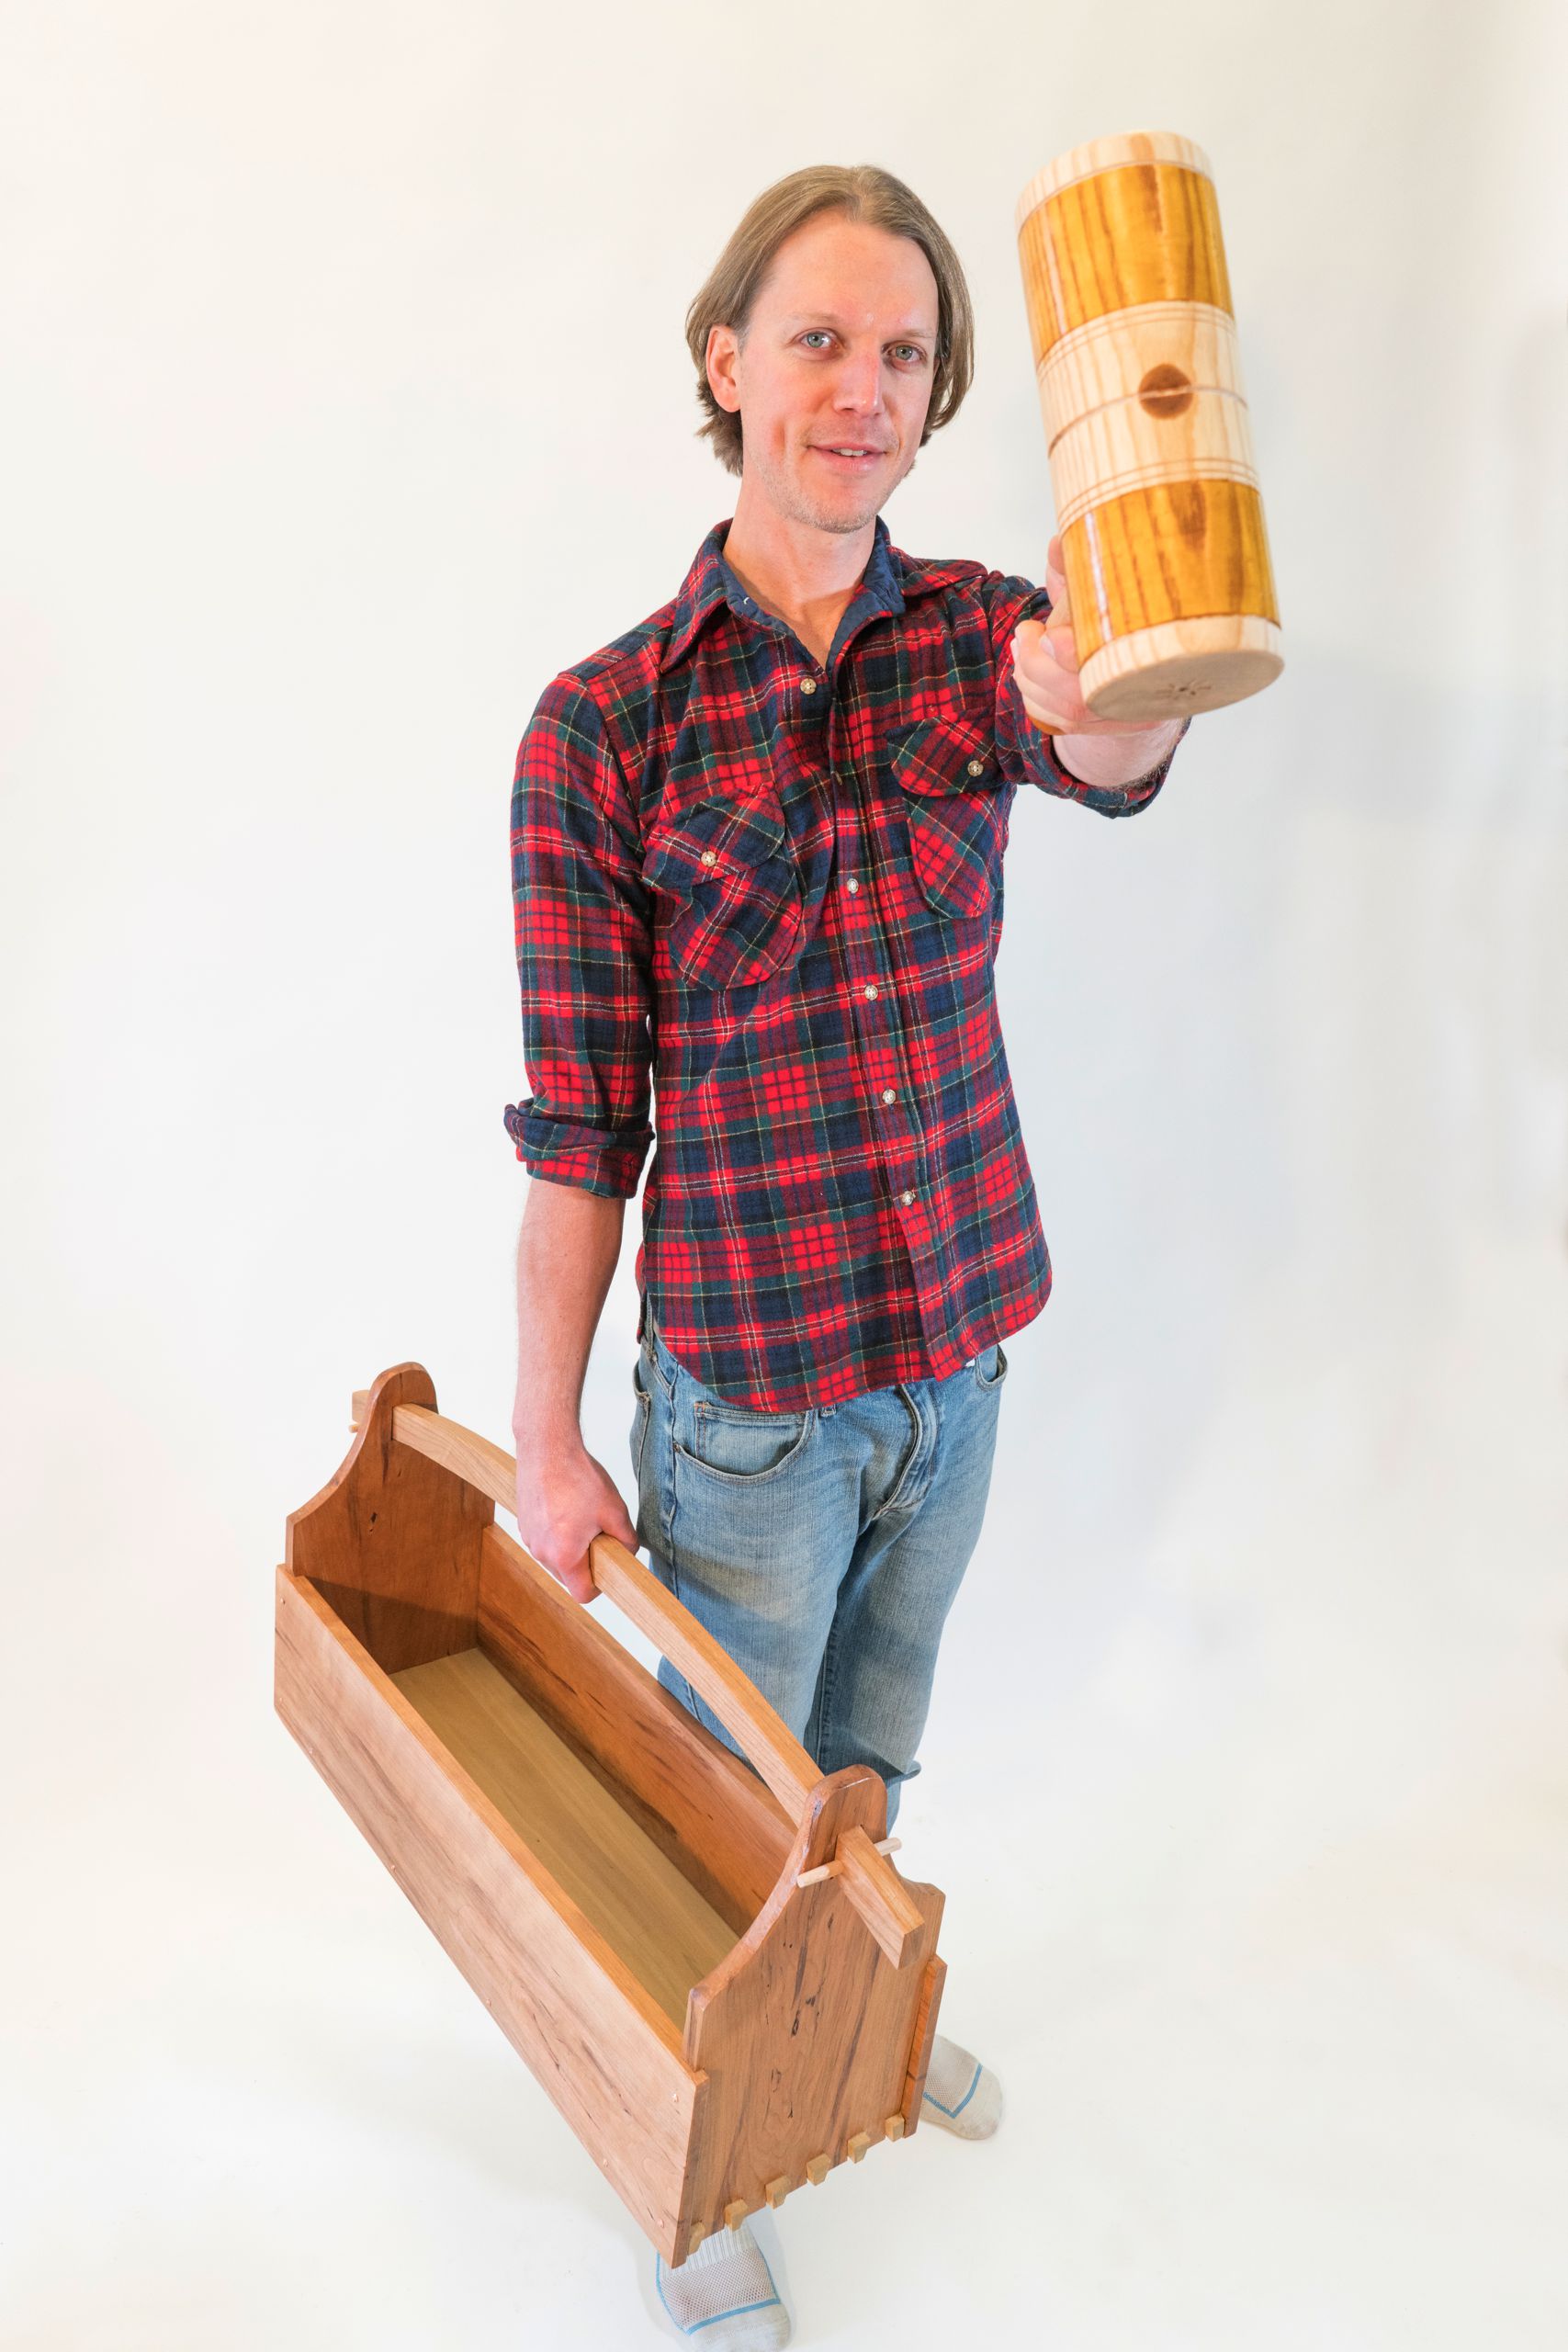 Tool tote in one hand and turned mallet in the other, Corey White